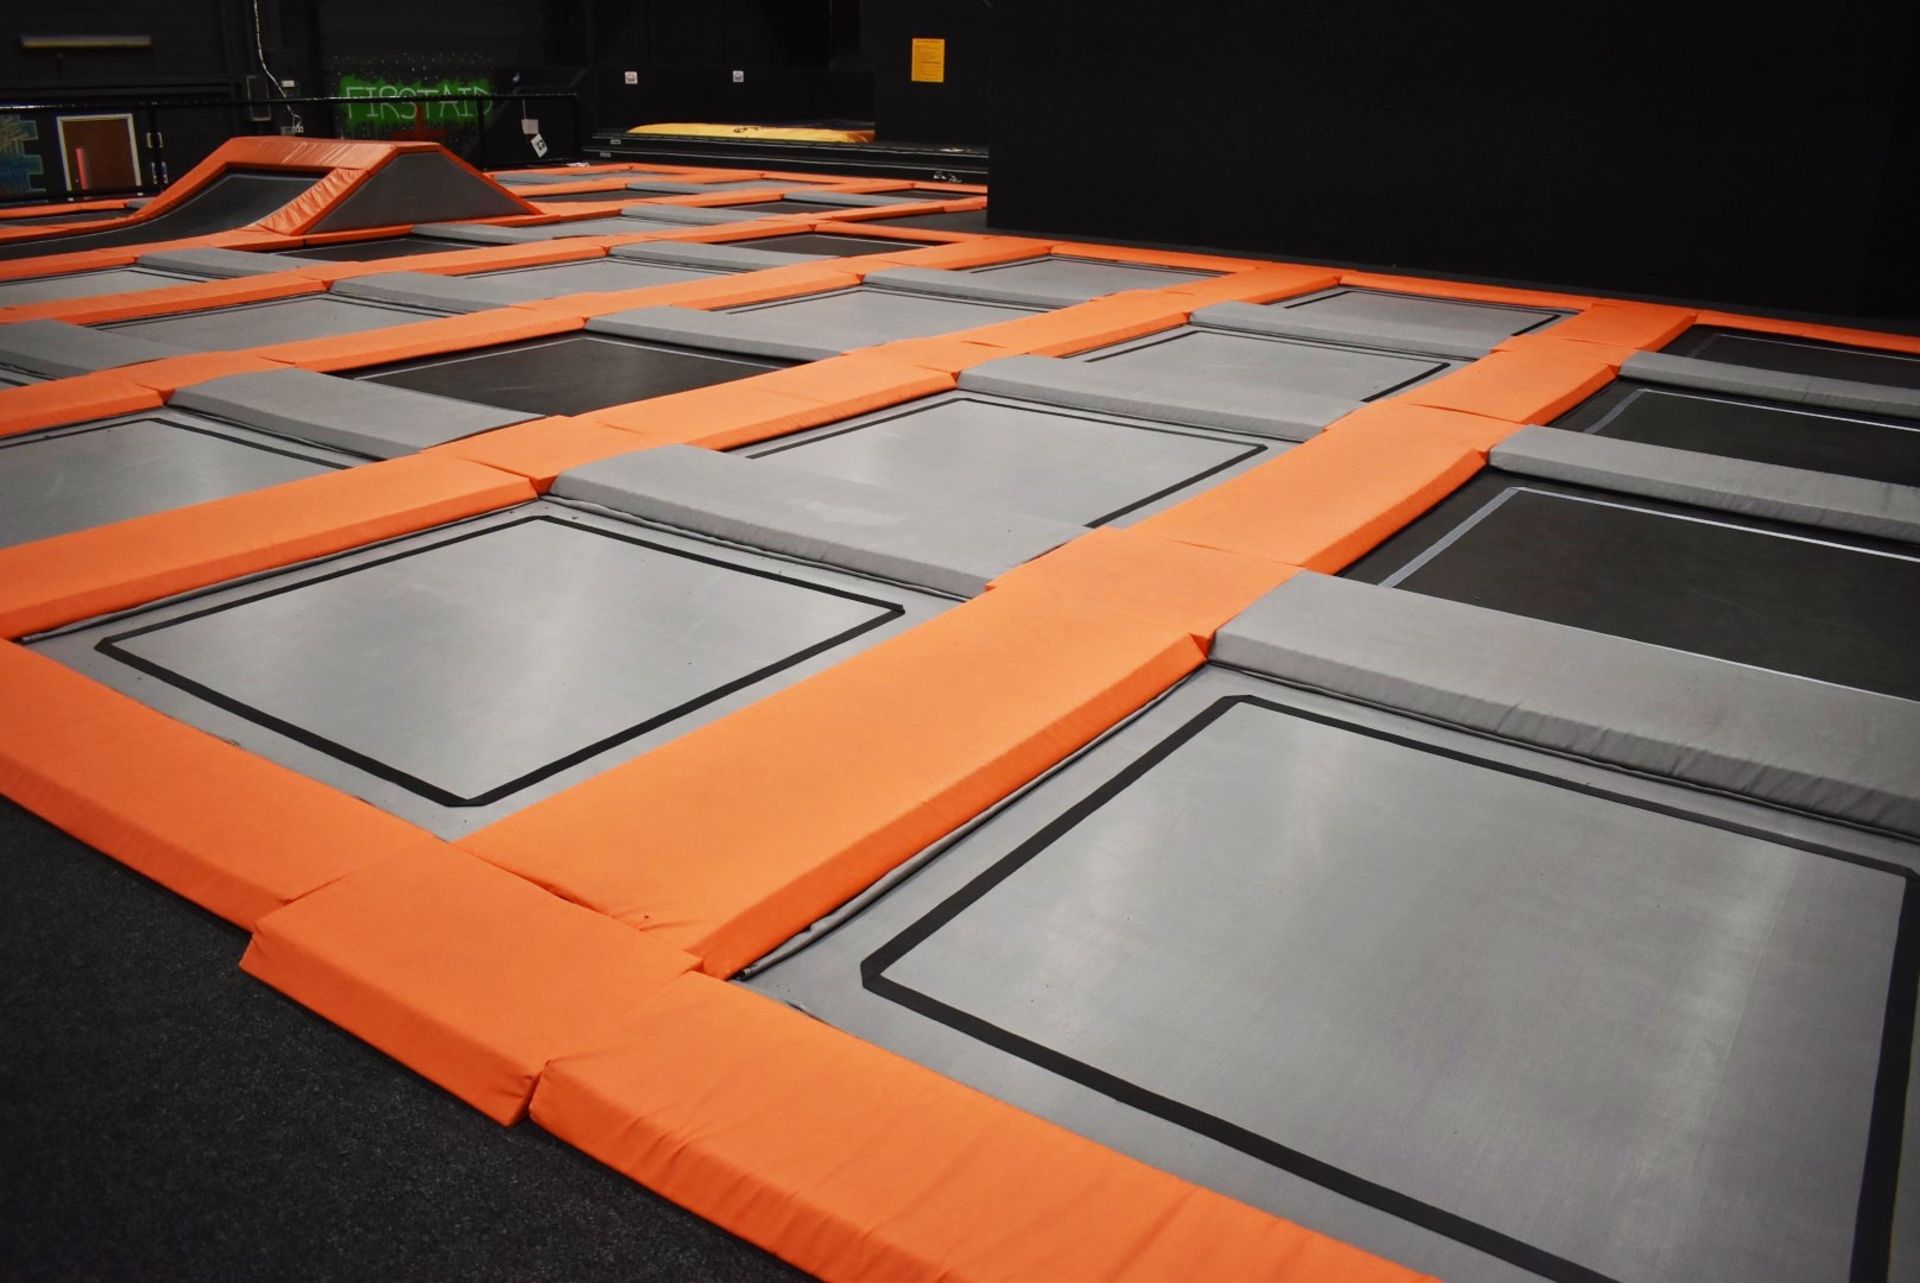 1 x Large Trampoline Park - Disassembled - Includes Dodgeball Arena And Jump Tower - CL766  - - Image 24 of 99